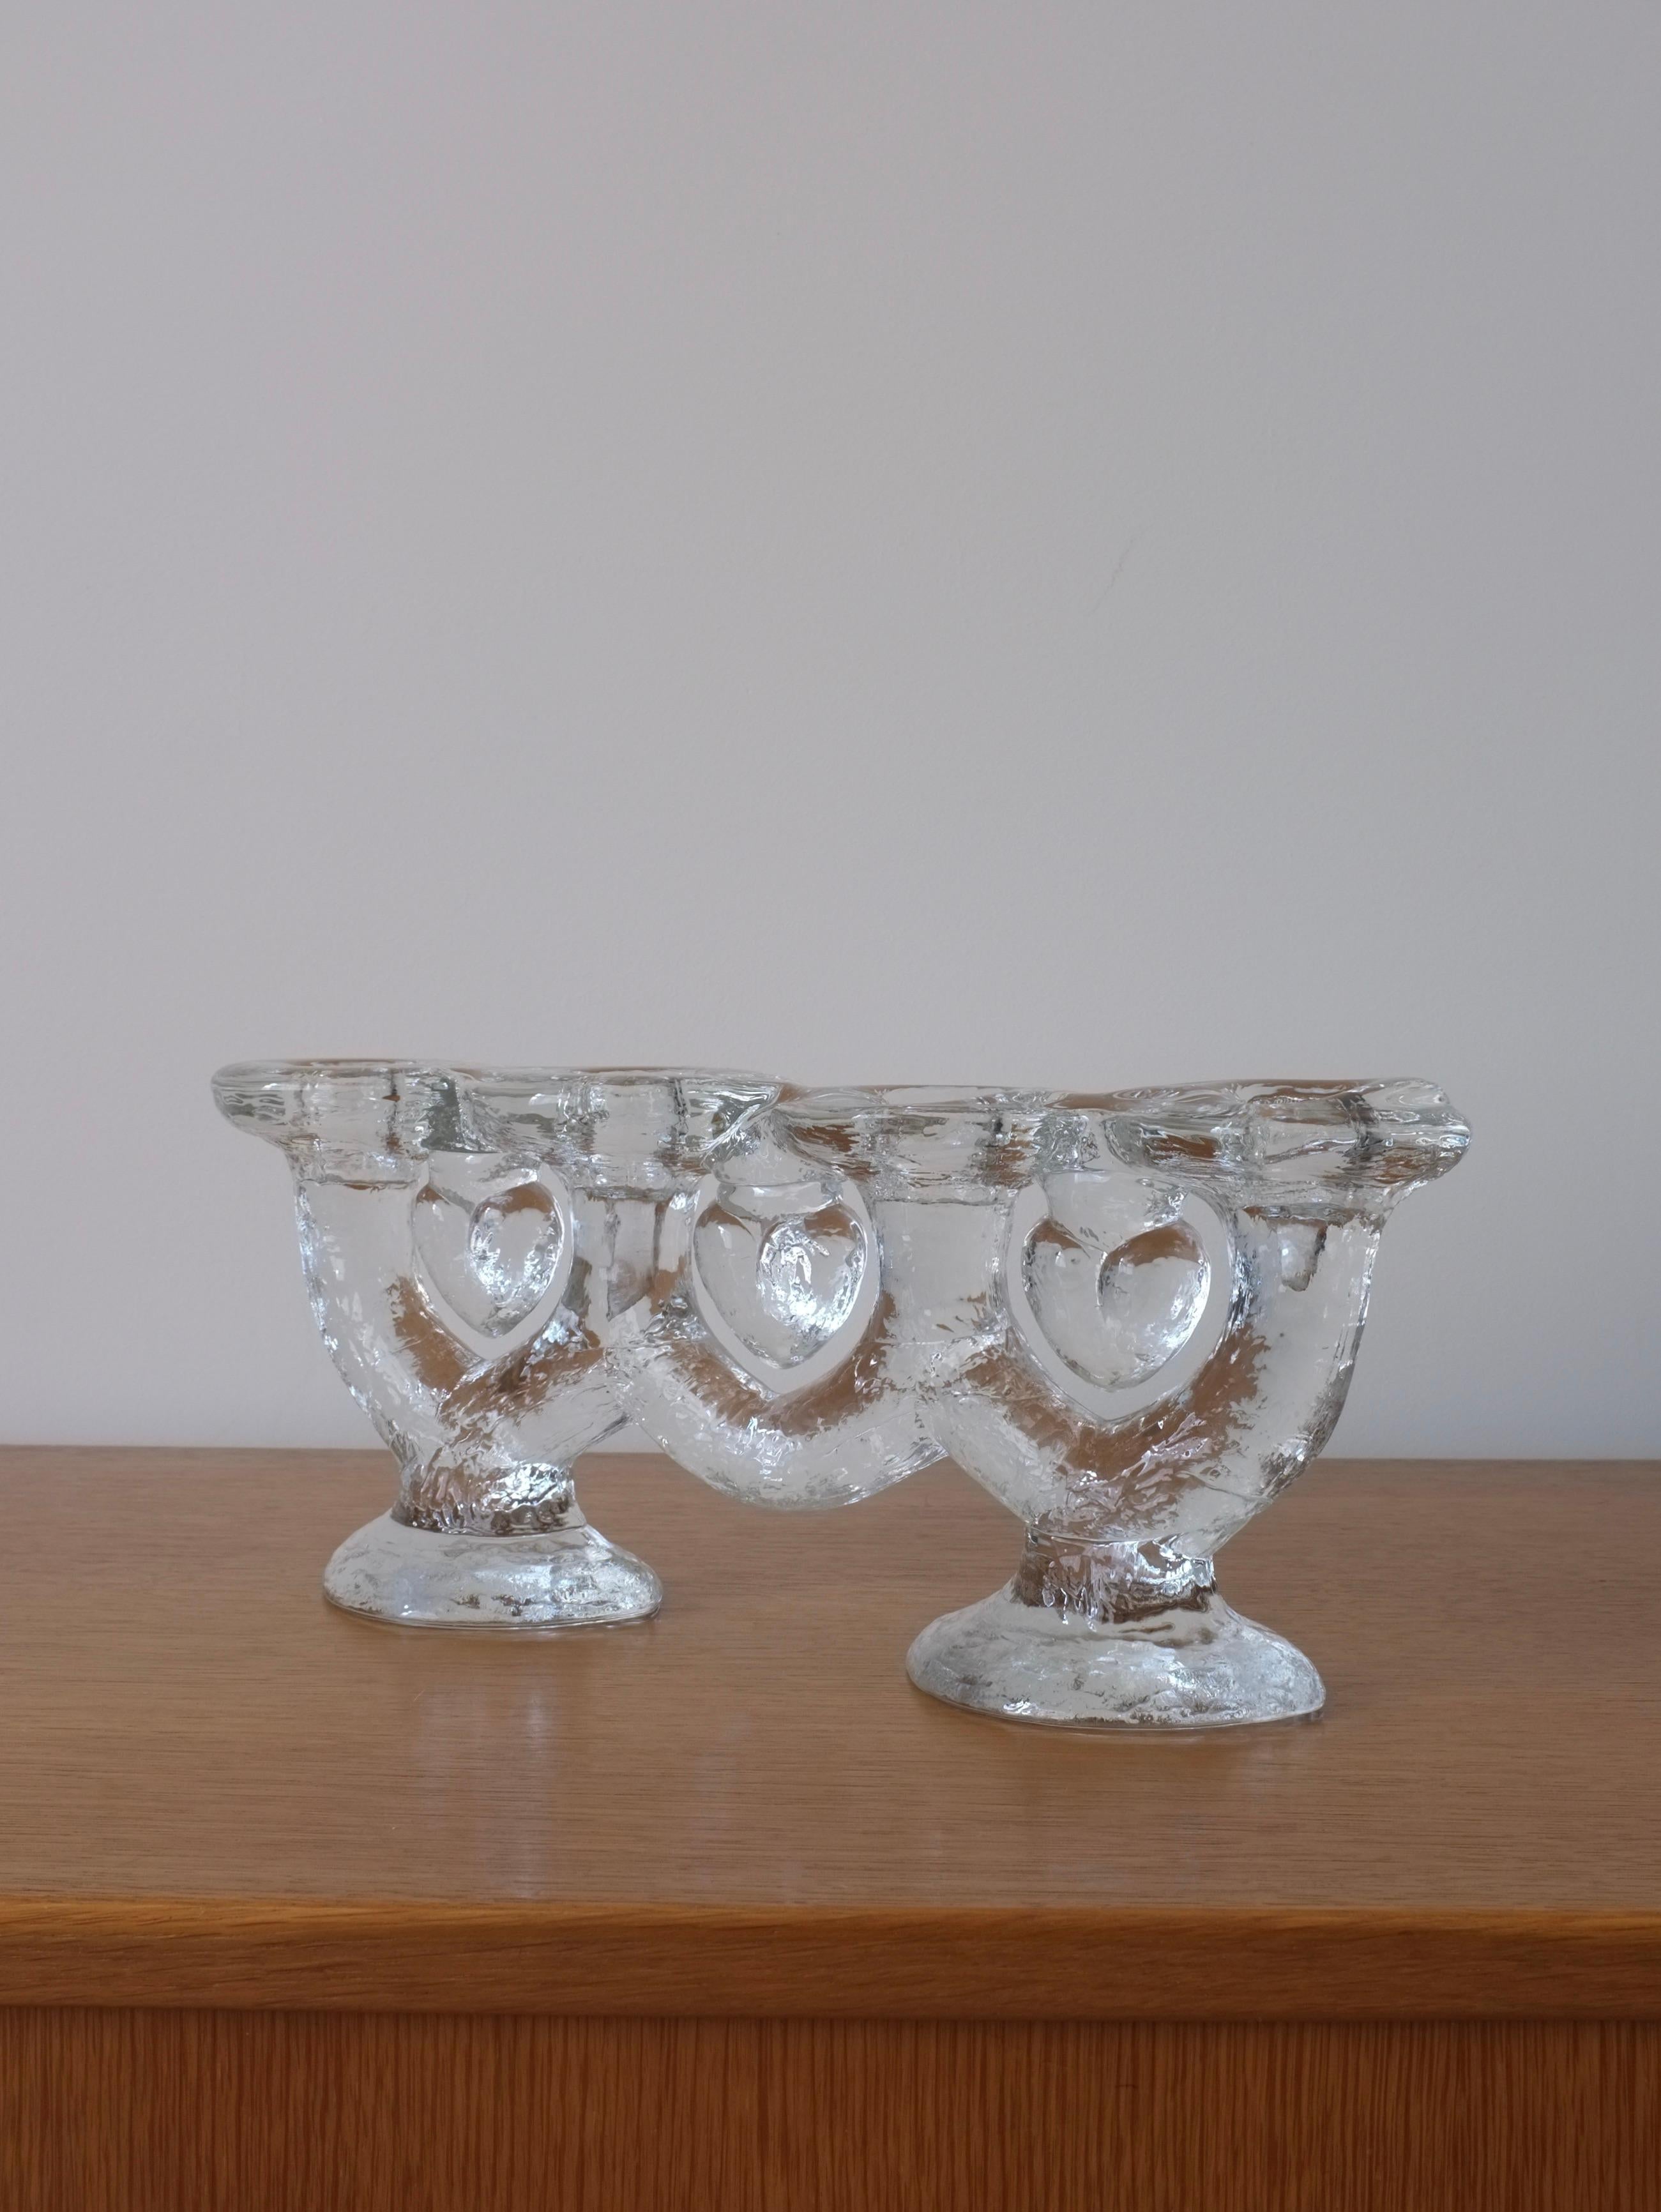 Vintage art glass four candle sticks holder from Pukeberg Glasbruk. The design is by Staffan Gellerstedt. 2 items are available.

Additional information:
Country of manufacture: Sweden
Design/Manufacture period: 1970s
Dimensions: 31 W x 6.5 D x 12 H